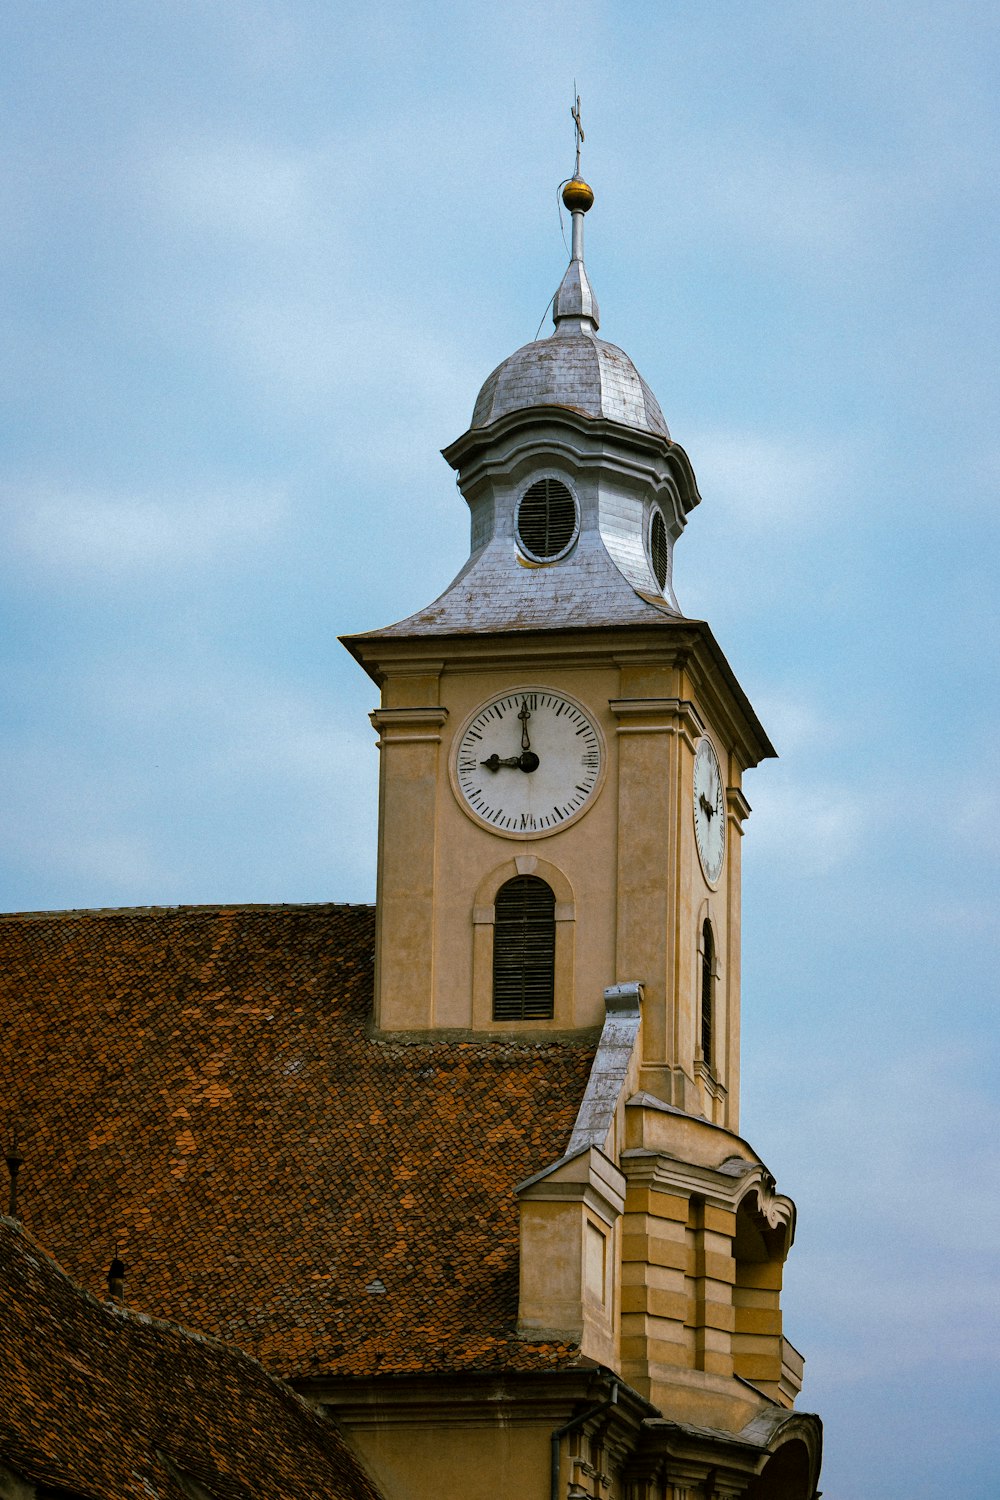 a large clock tower on top of a building